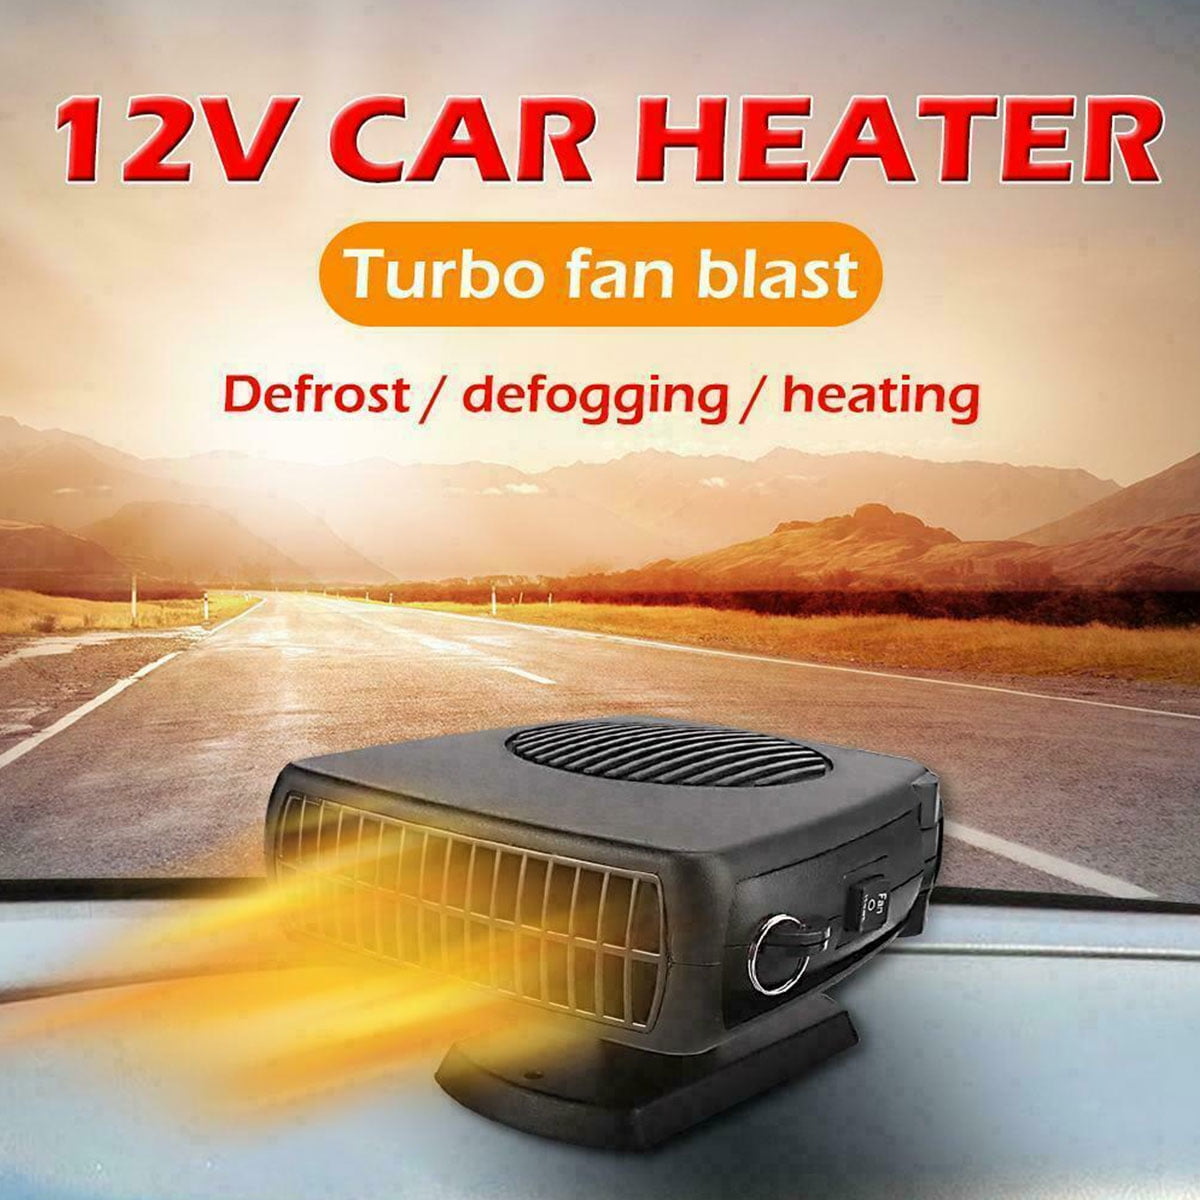 MASO 24V 500W Car Defroster,Car Heater,with 2 Outlet for Vehicle RV SUV Truck 